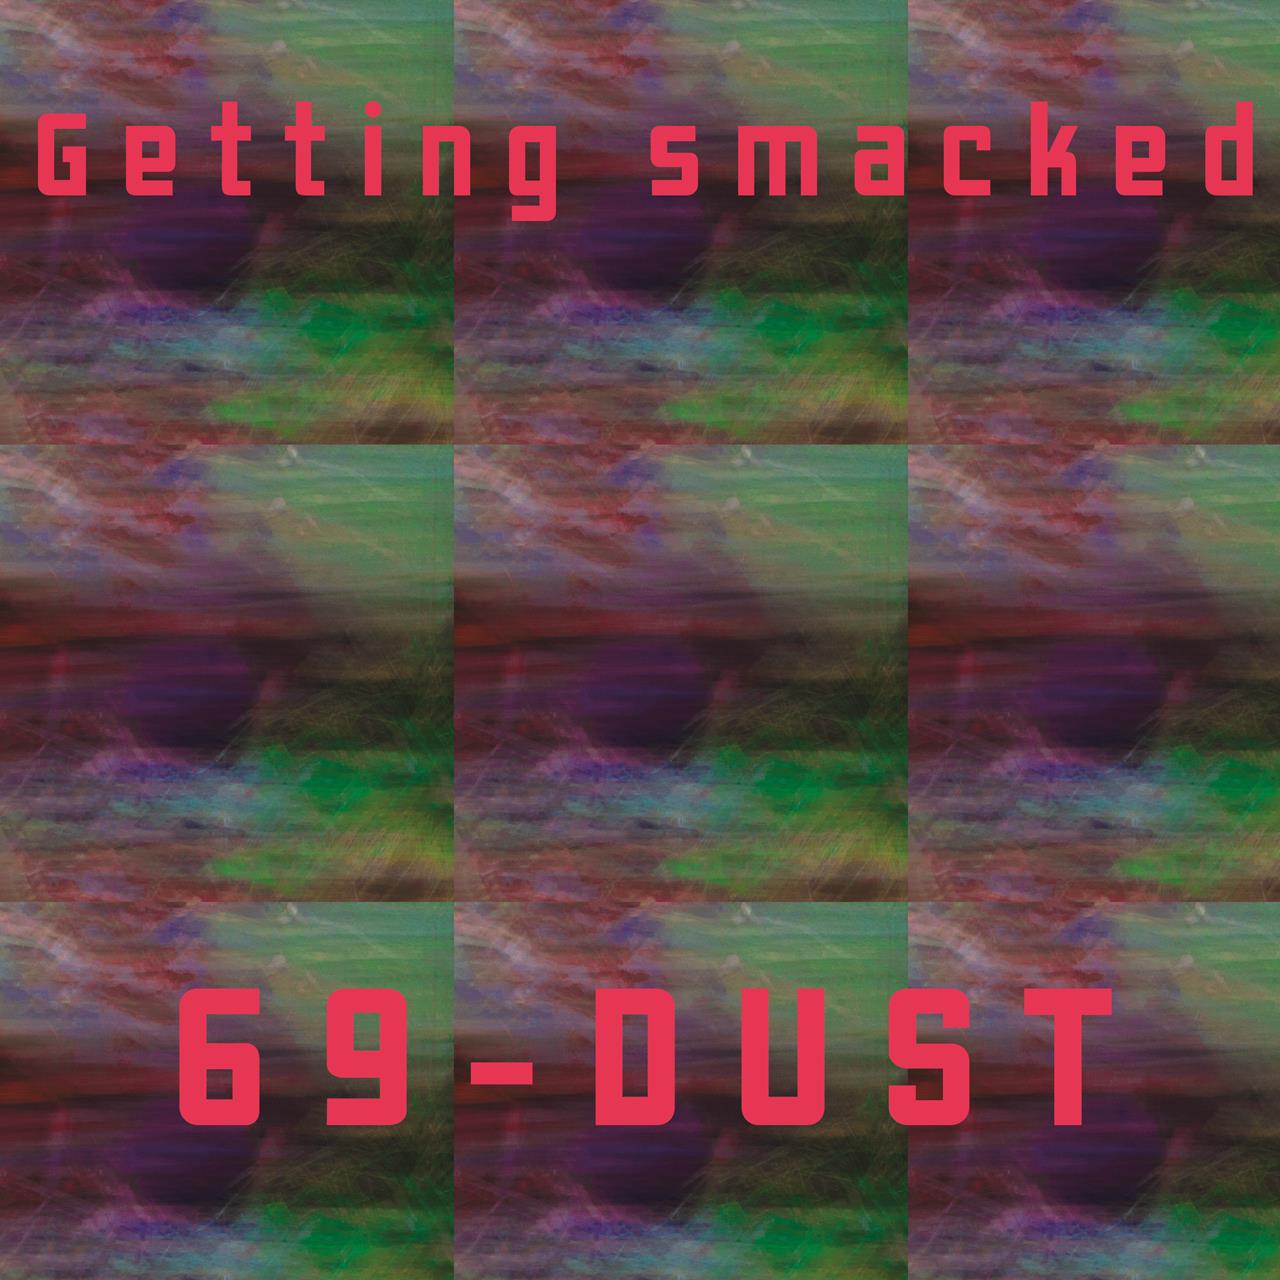 Getting smacked - cover art